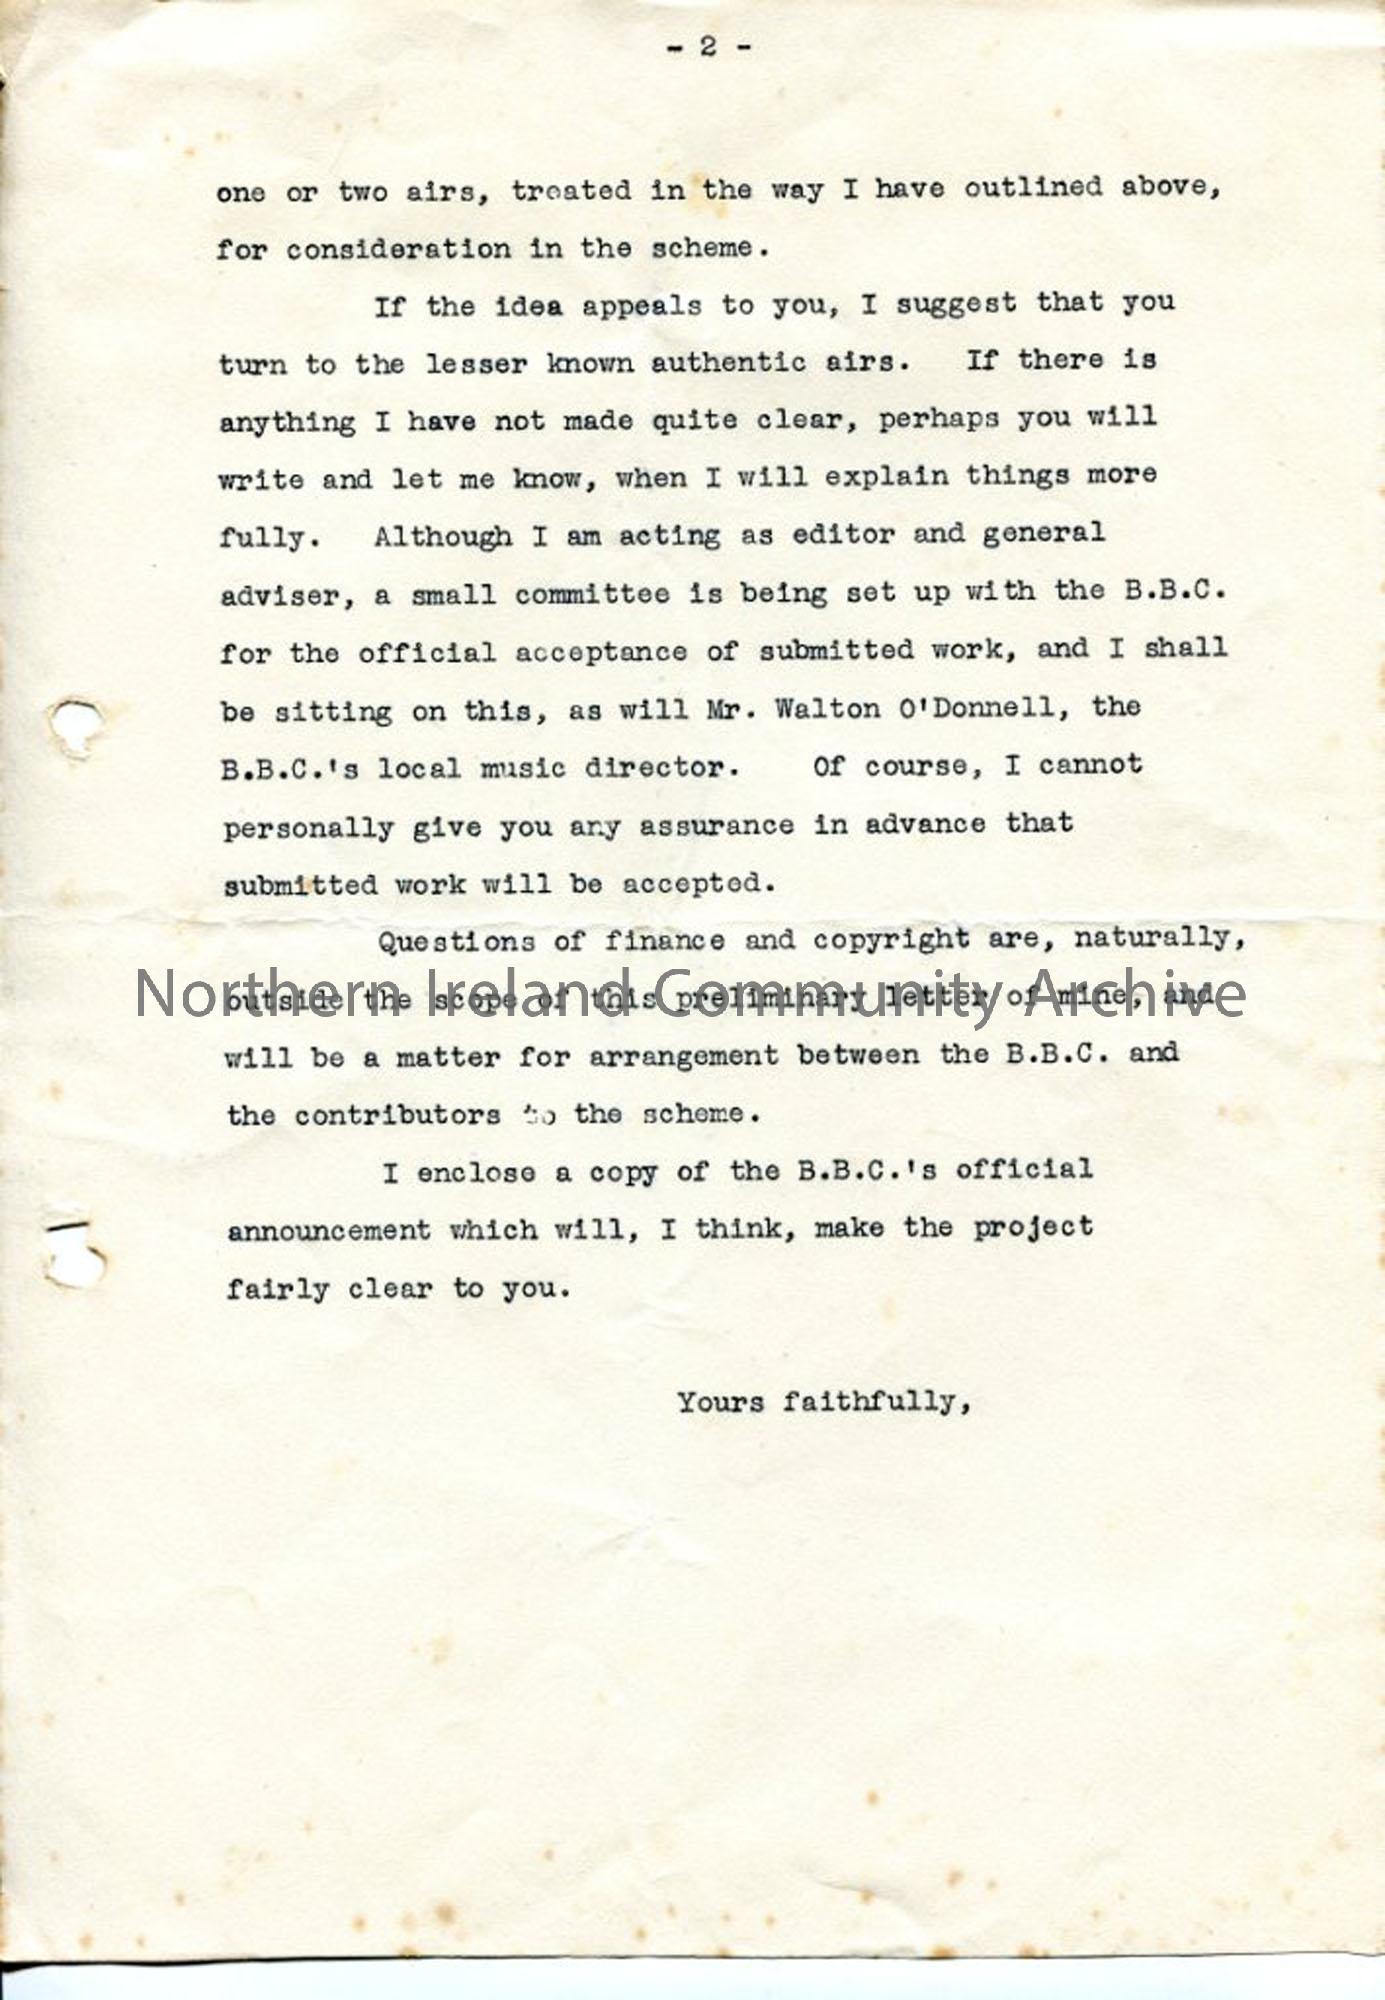 Page 2 of 2 – Typed letter from Norman Hay, no date recorded